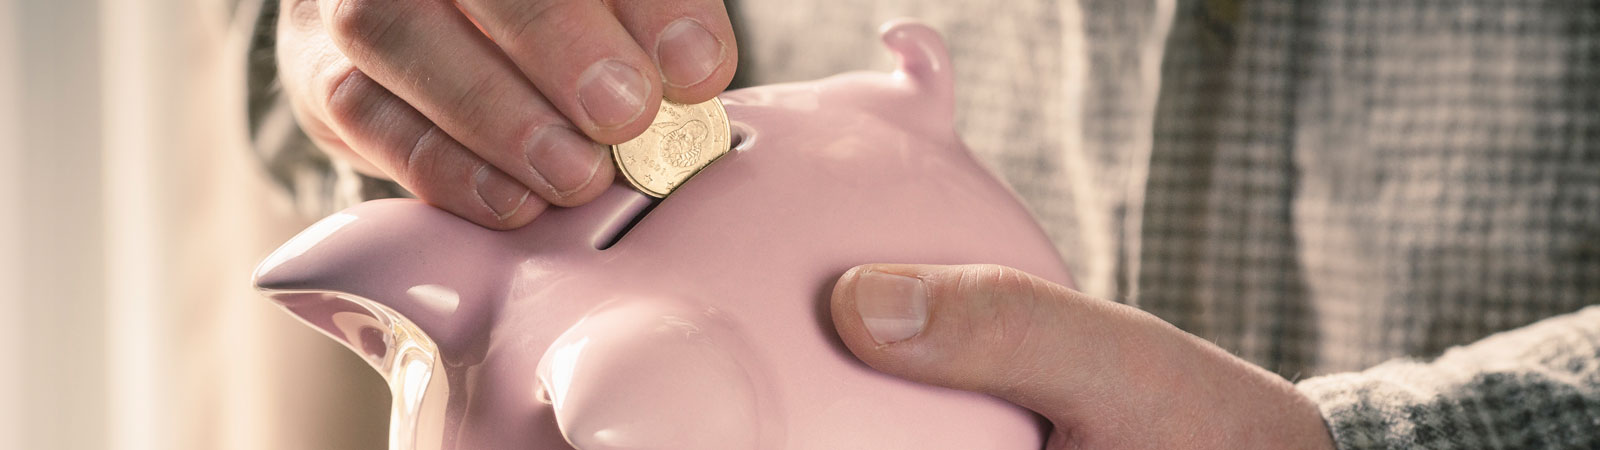 putting coins in money pig